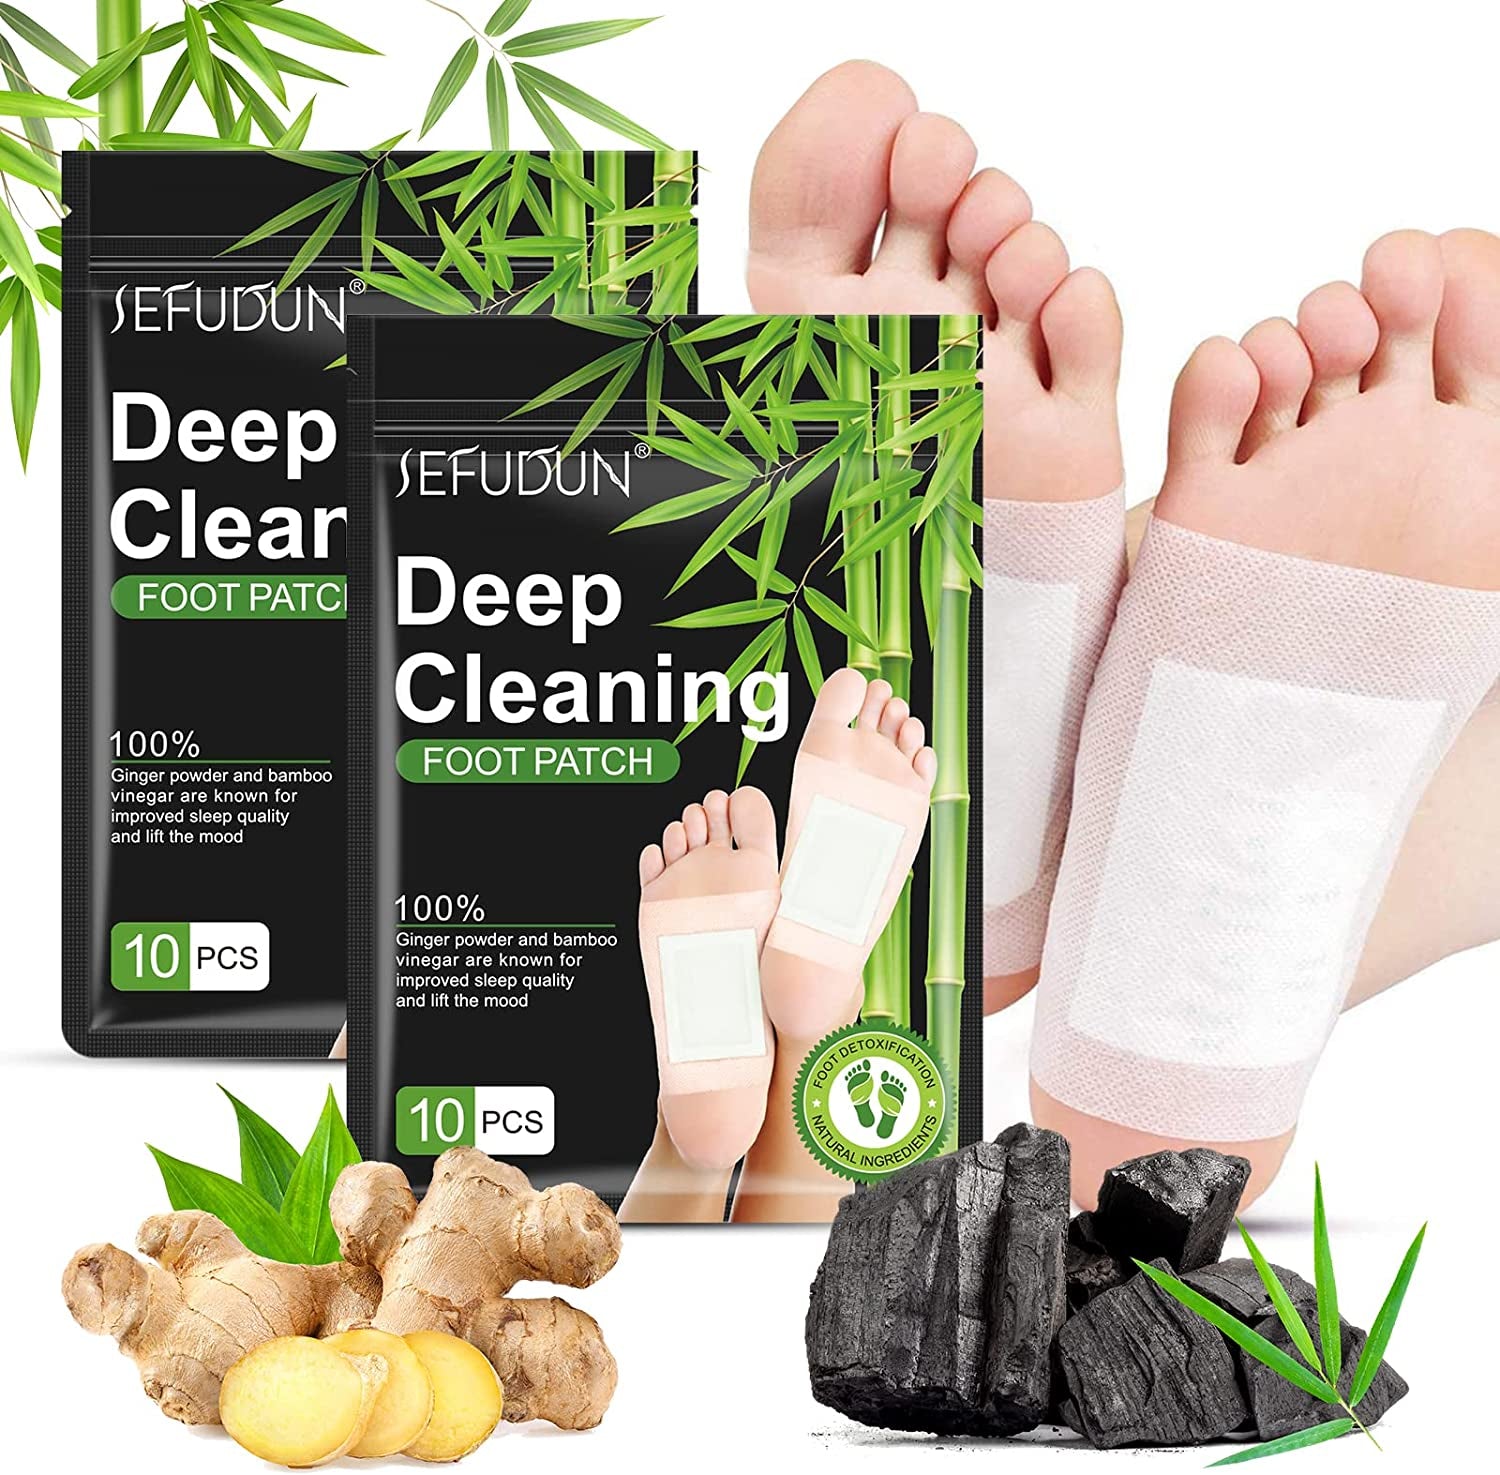 30PCS Detox Foot Pads, Deep Cleansing Foot Pads, Natural Ginger Powder Bamboo Vinegar Foot Patches for Foot Care, Adhesive Sheets for Pain Relief, Relieve Stress, Improve Sleep, Relaxation